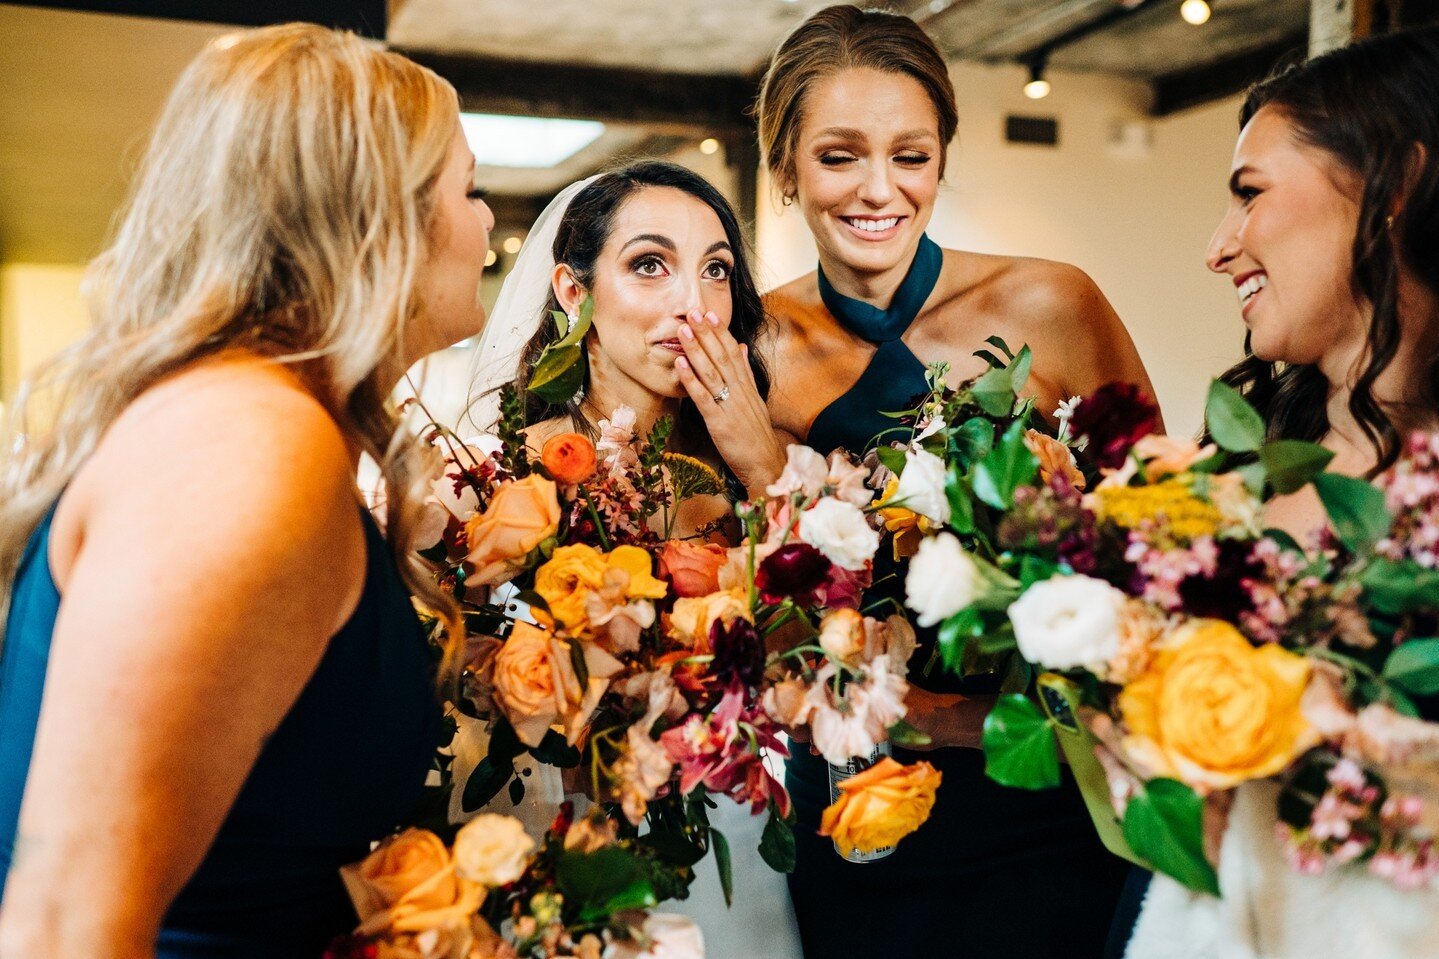 When you see your wedding come together after 2 extra years of waiting 🖤⁠
⁠
Vendors:⁠
Photography- @captured.by.alyssa⁠
Coordination- @1423events⁠
Florals- @steelcutflowerco⁠
Venue- @thewinslowbaltimore⁠
Beauty- @vintageveils⁠
Video- @timwesphotogra